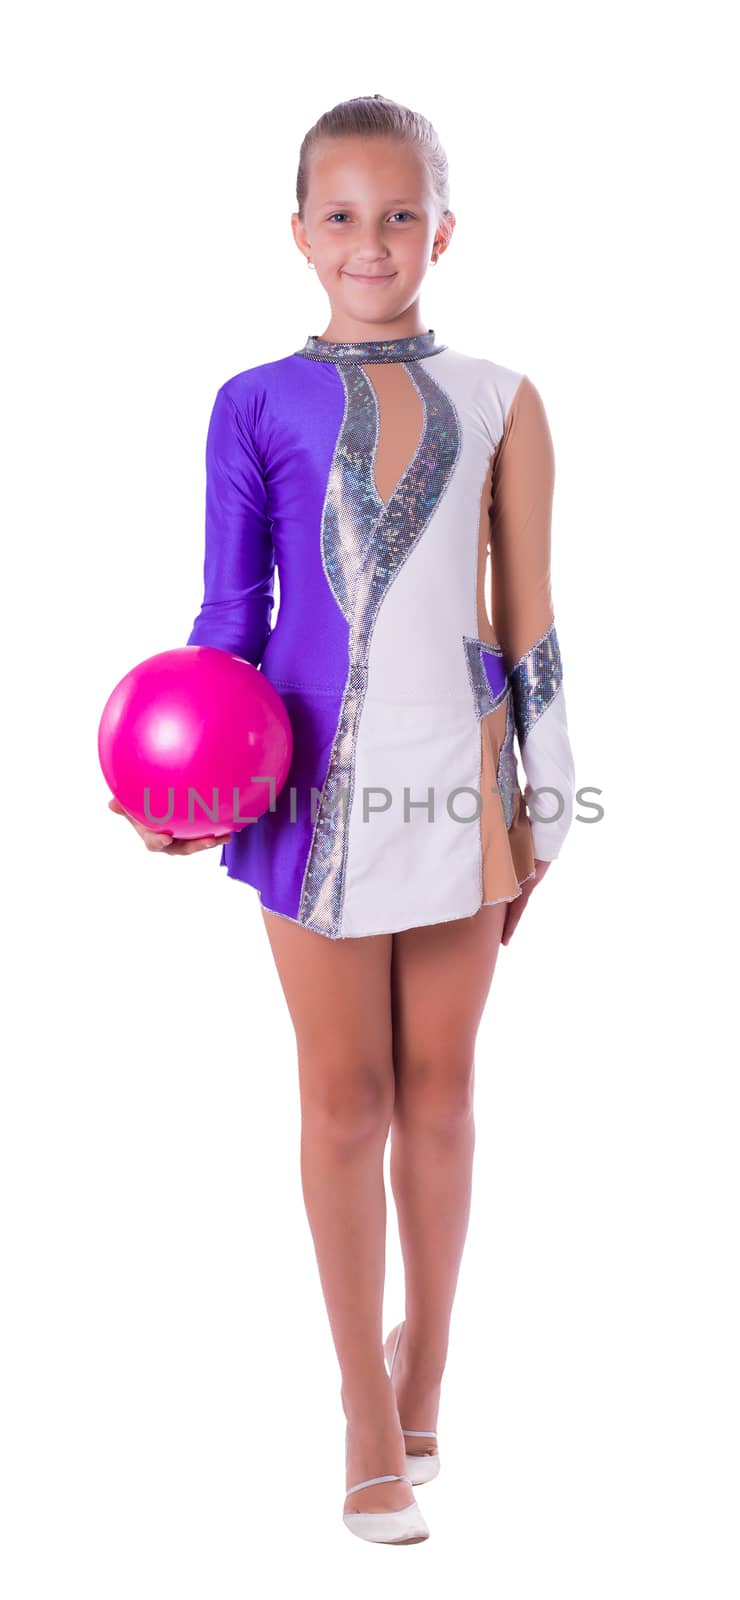 girl gymnast standing with ball isolated on white background